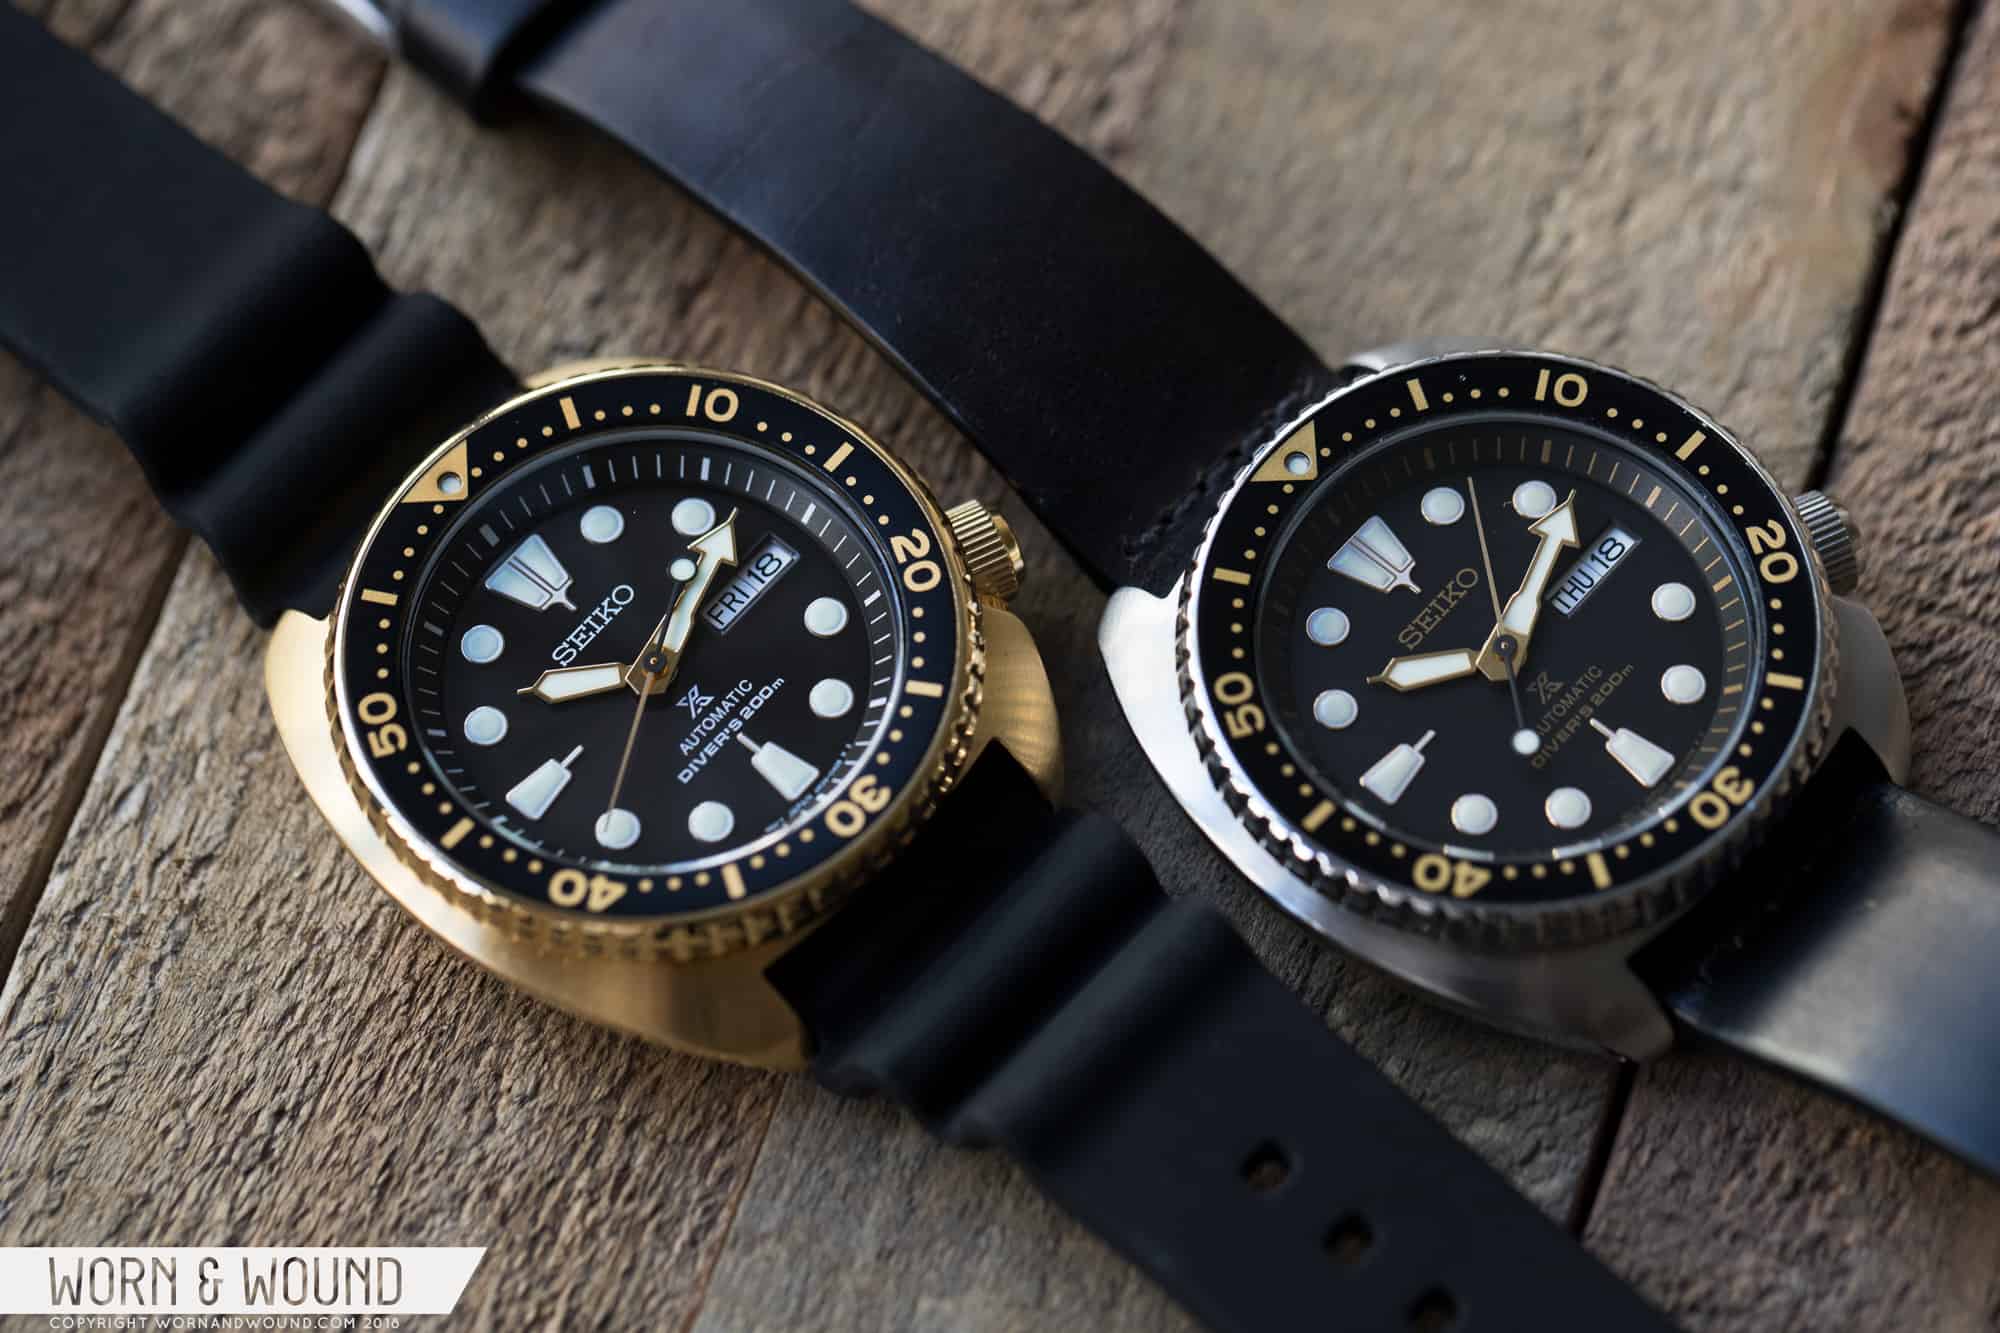 Hands-On (Video) With the Seiko Prospex ref. SRPC44 